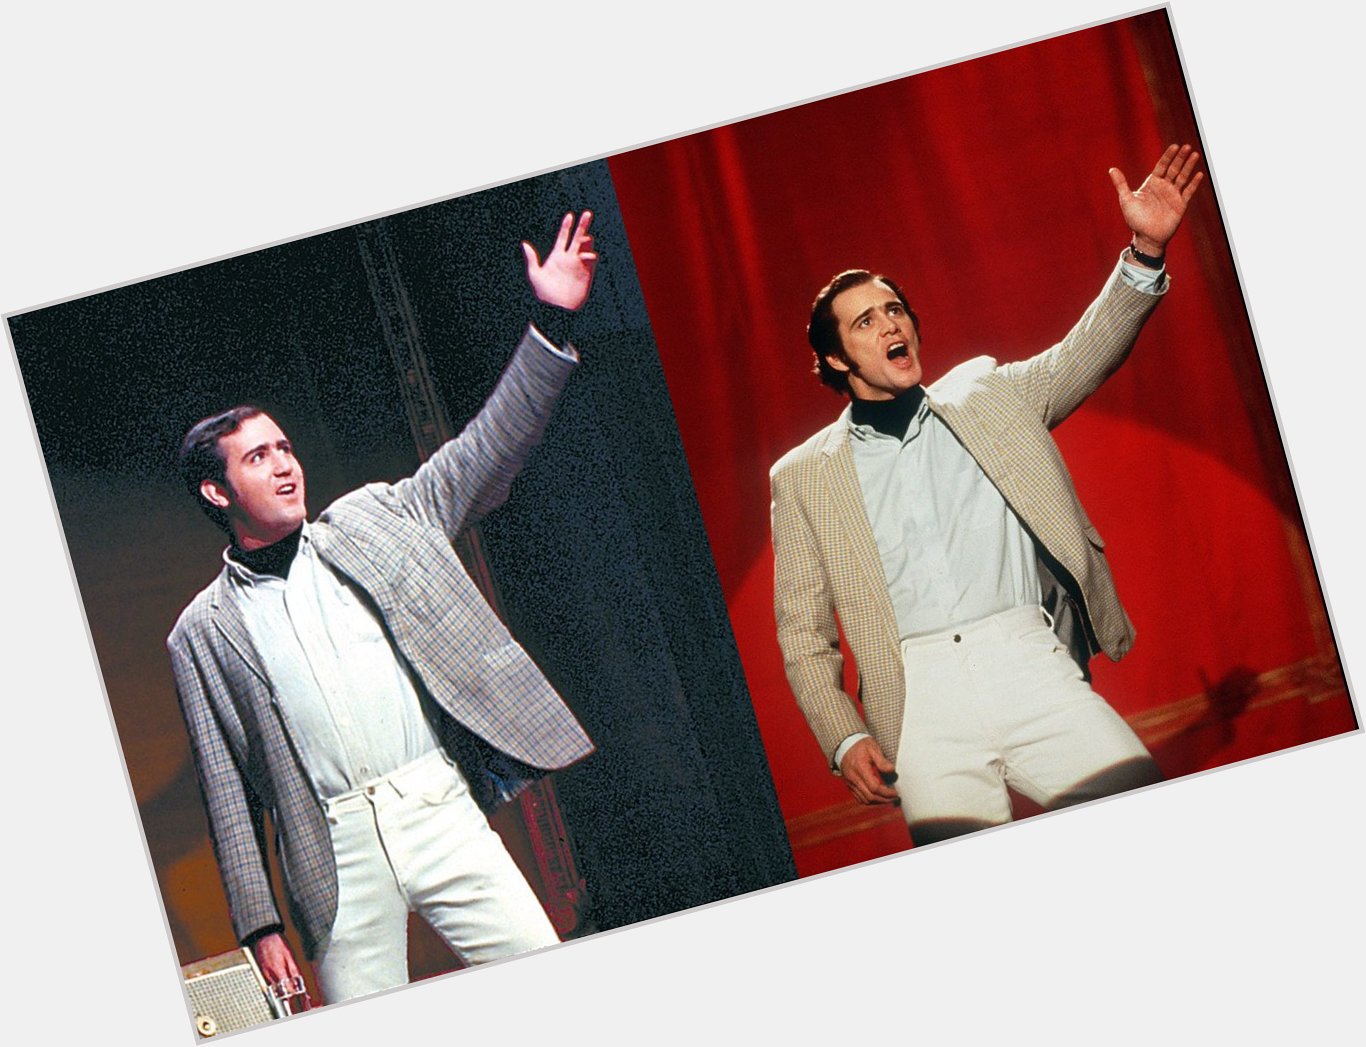 Happy Birthday to both Andy Kaufman and Jim Carrey. 